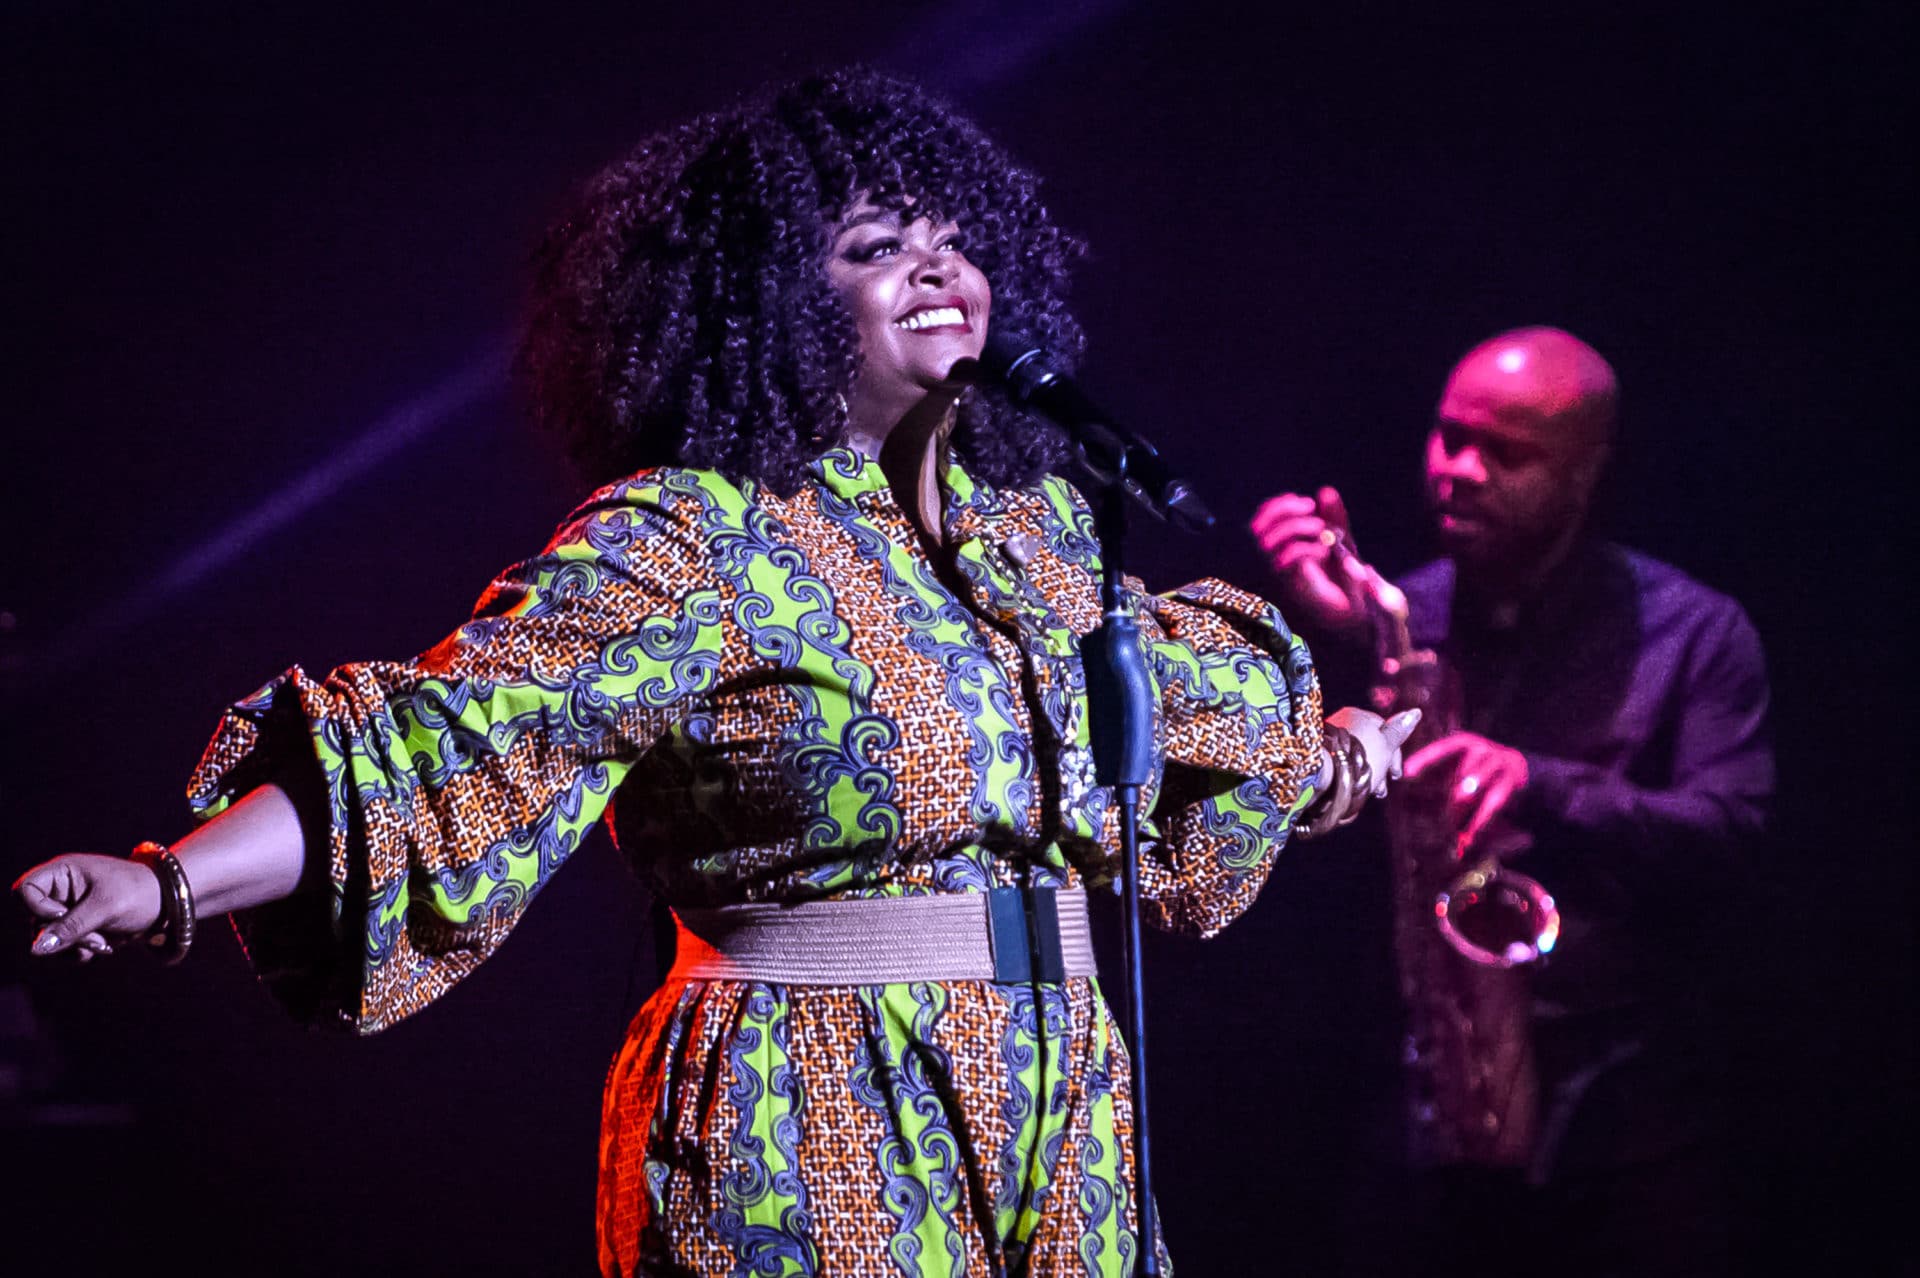 11 Of Jill Scott's Sexiest, Steamiest Lyrics To Get You In The Mood